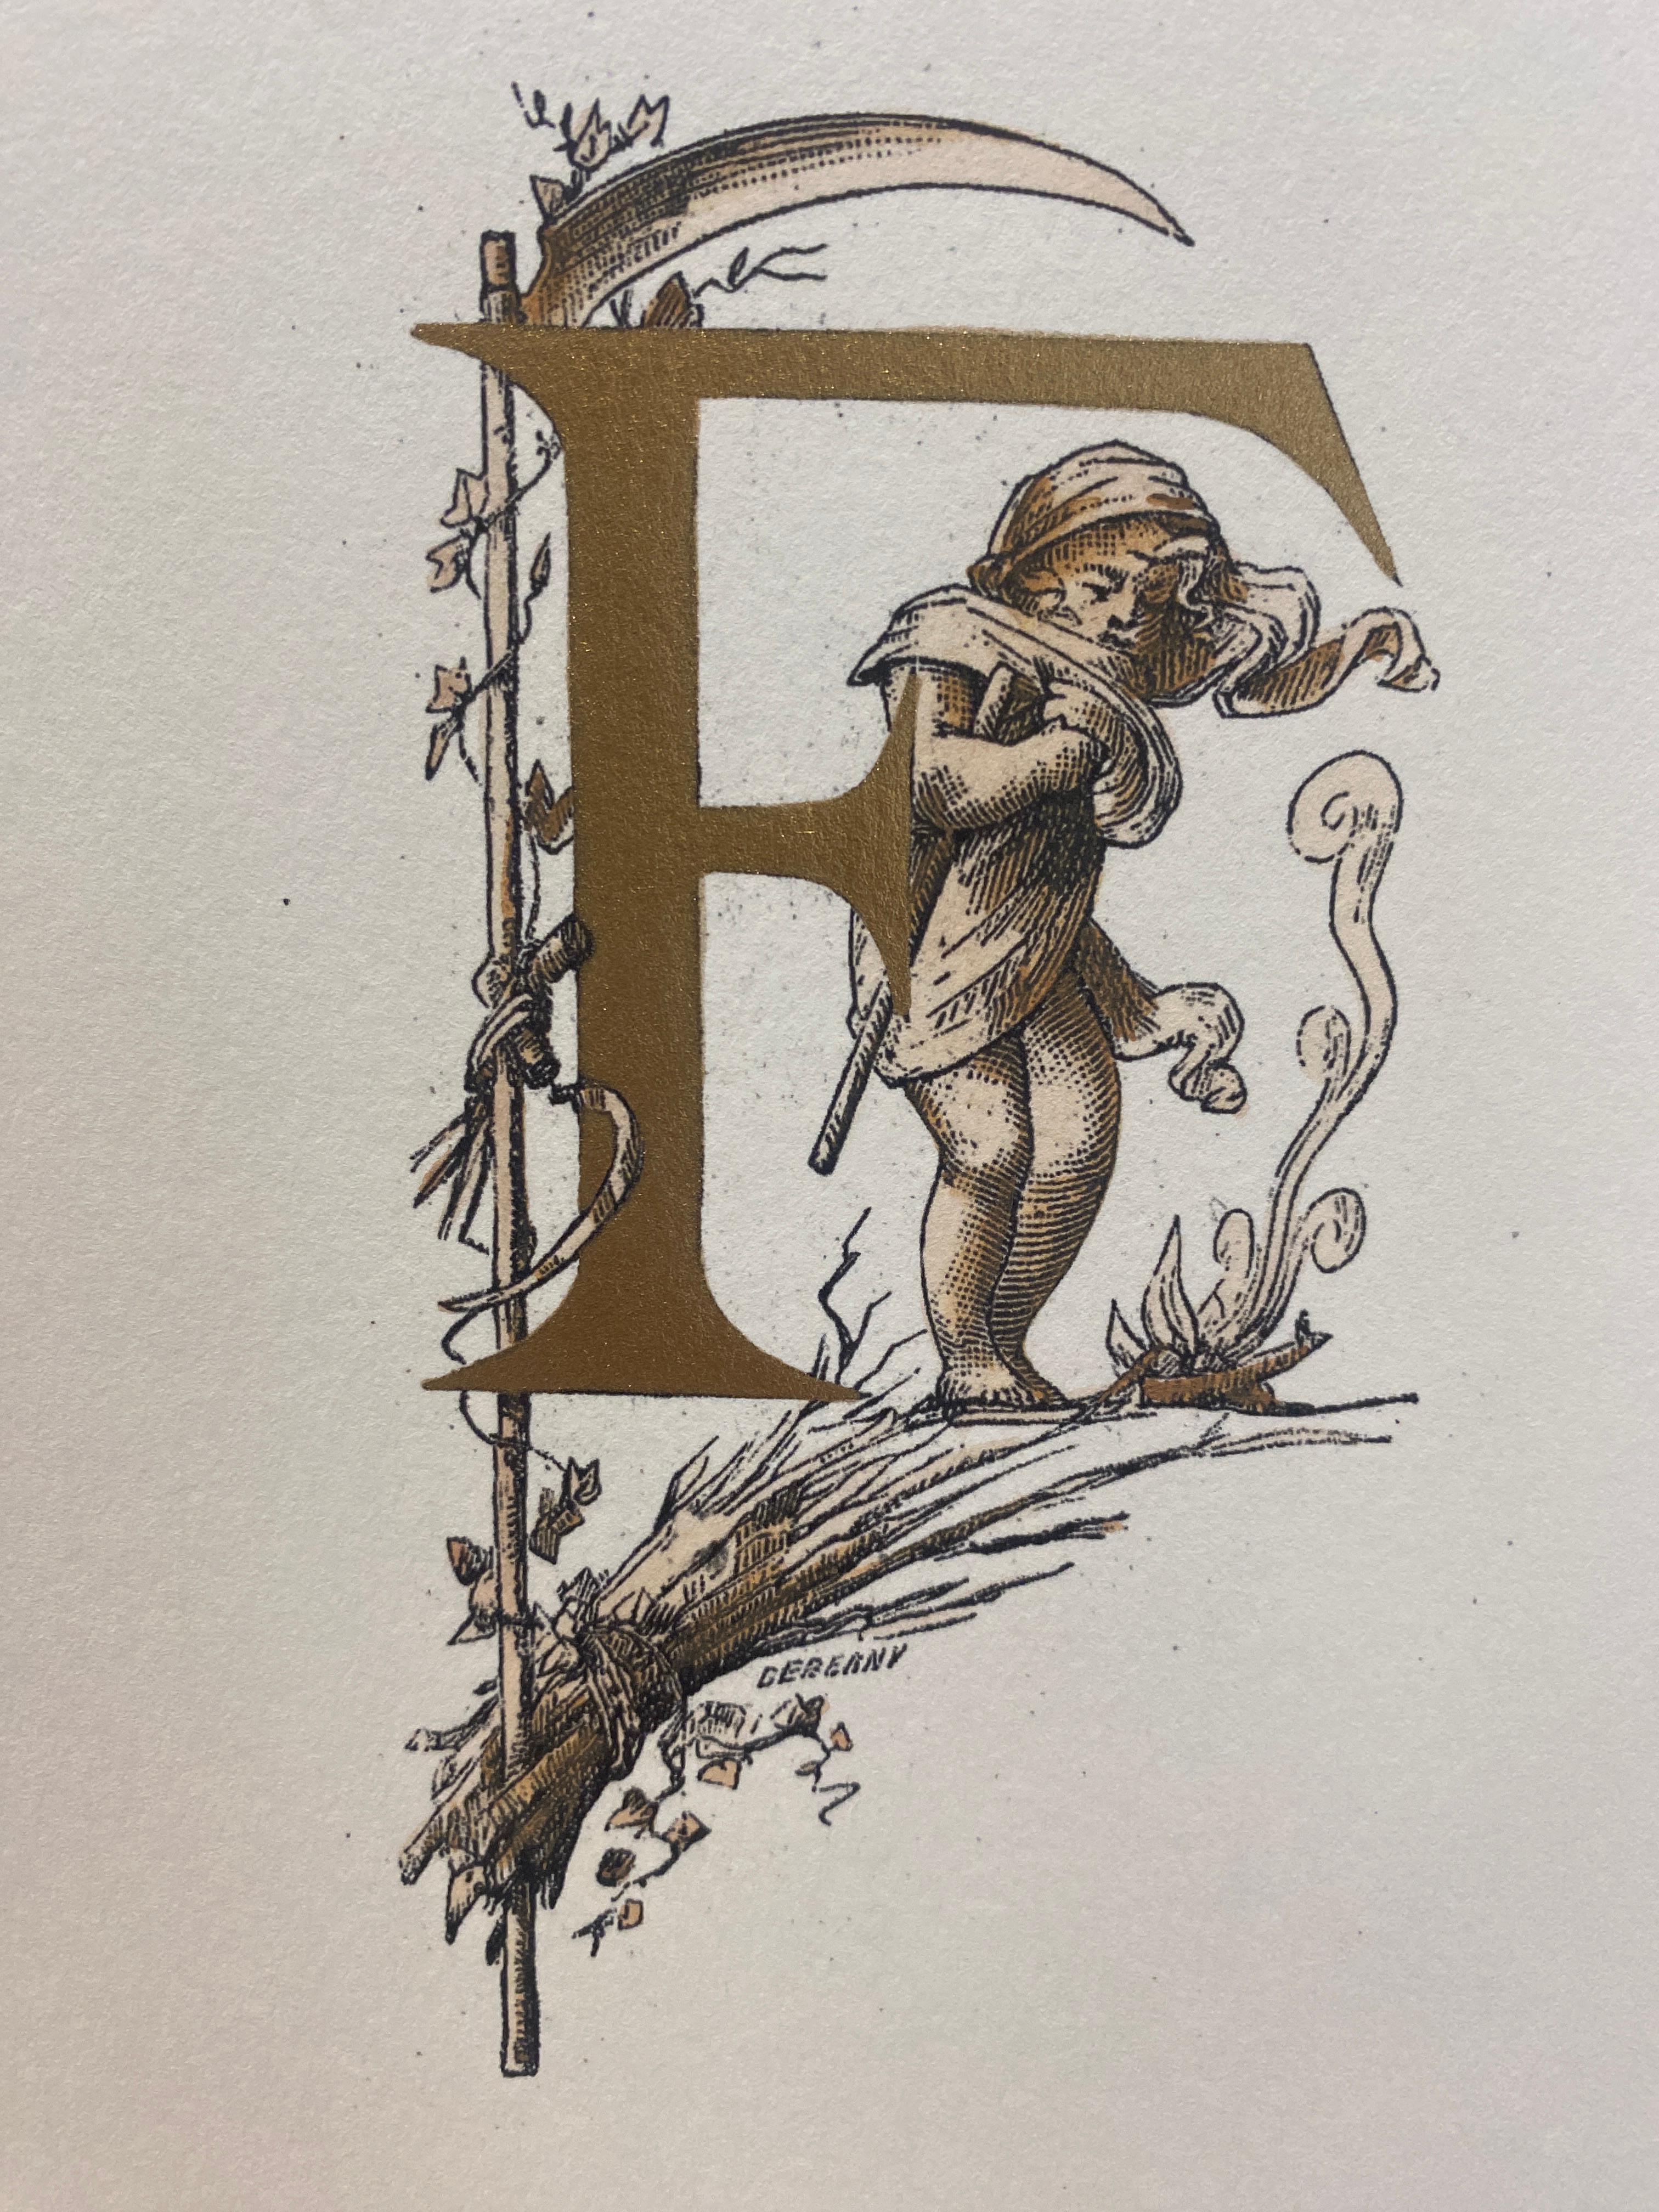 Elegant hand-pressed print representing  some letters of the alphabet with allegorical figure,  illustrated through the image of small grotesque angels translating the letters through arts and crafts. In this one we find the letter F representing a